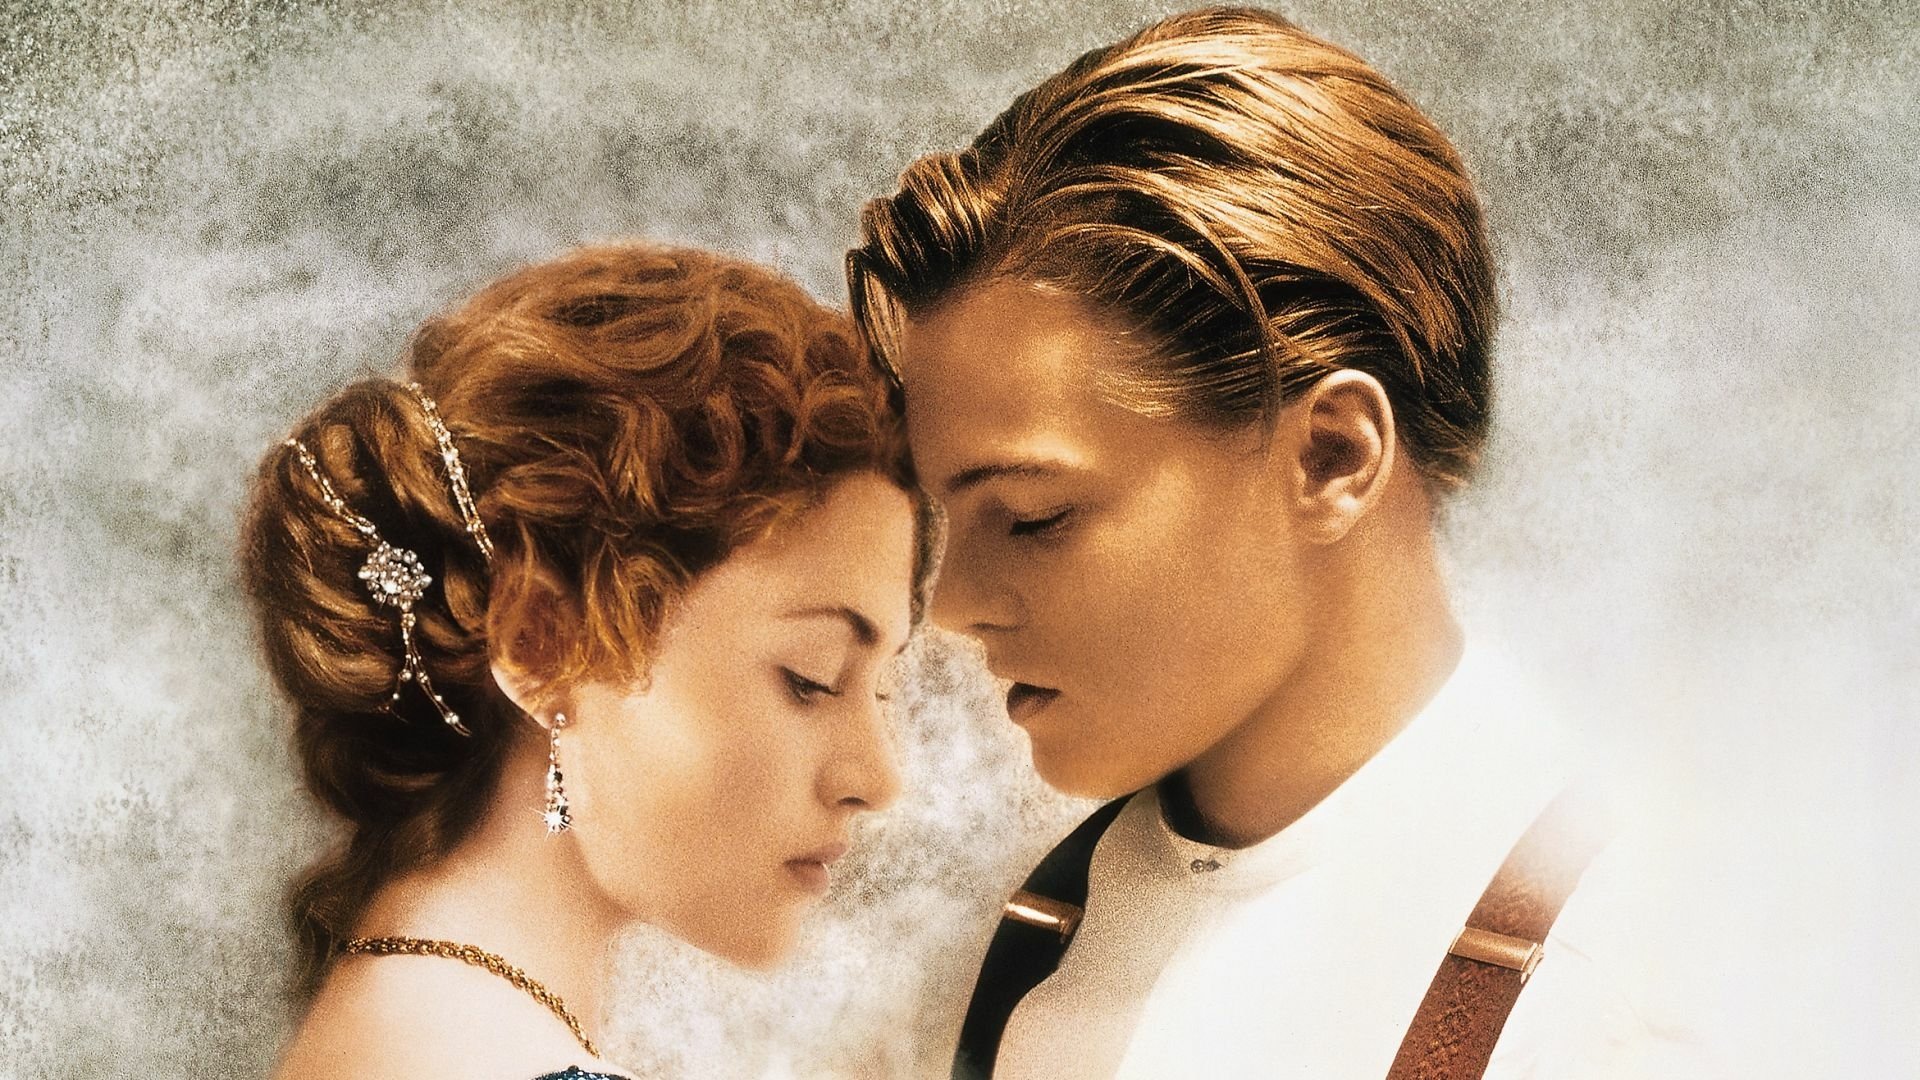 The Revealing Legacy of 'Titanic,' 25 Years Later - The Atlantic